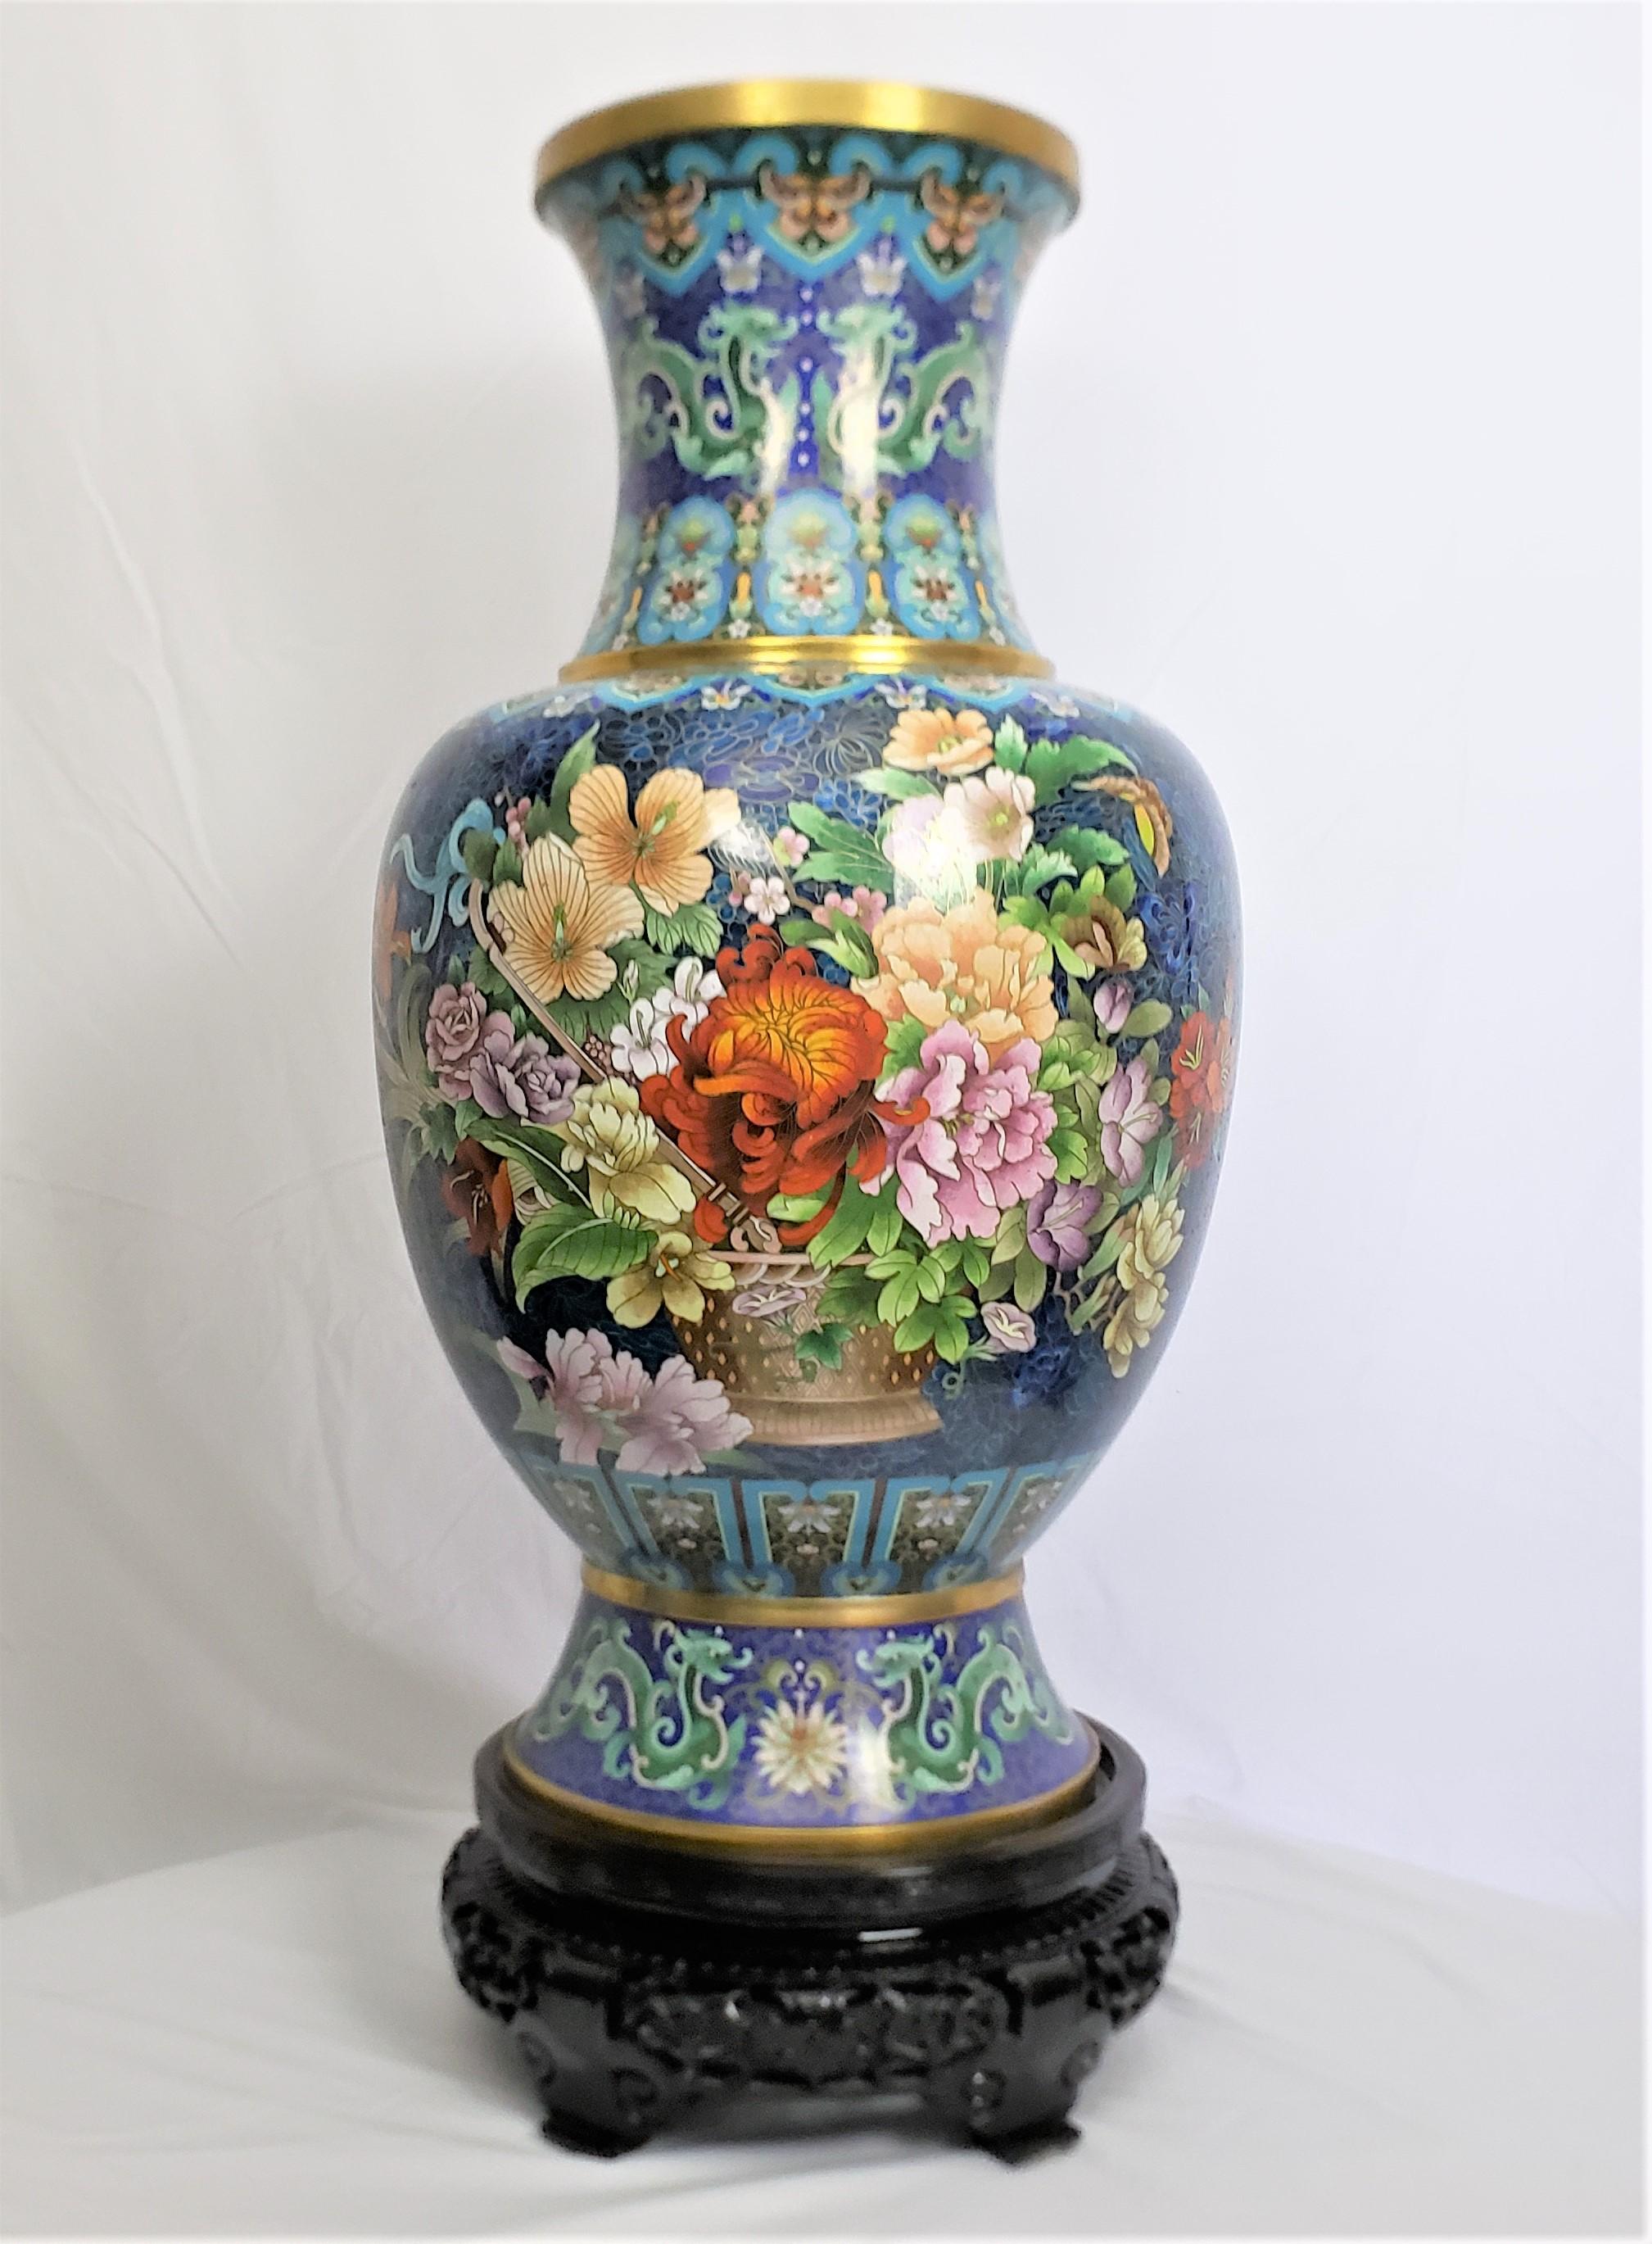 Chinese Export Huge Mid 20th Century Chinese Cloisonne Vase with Ornate Floral Decoration